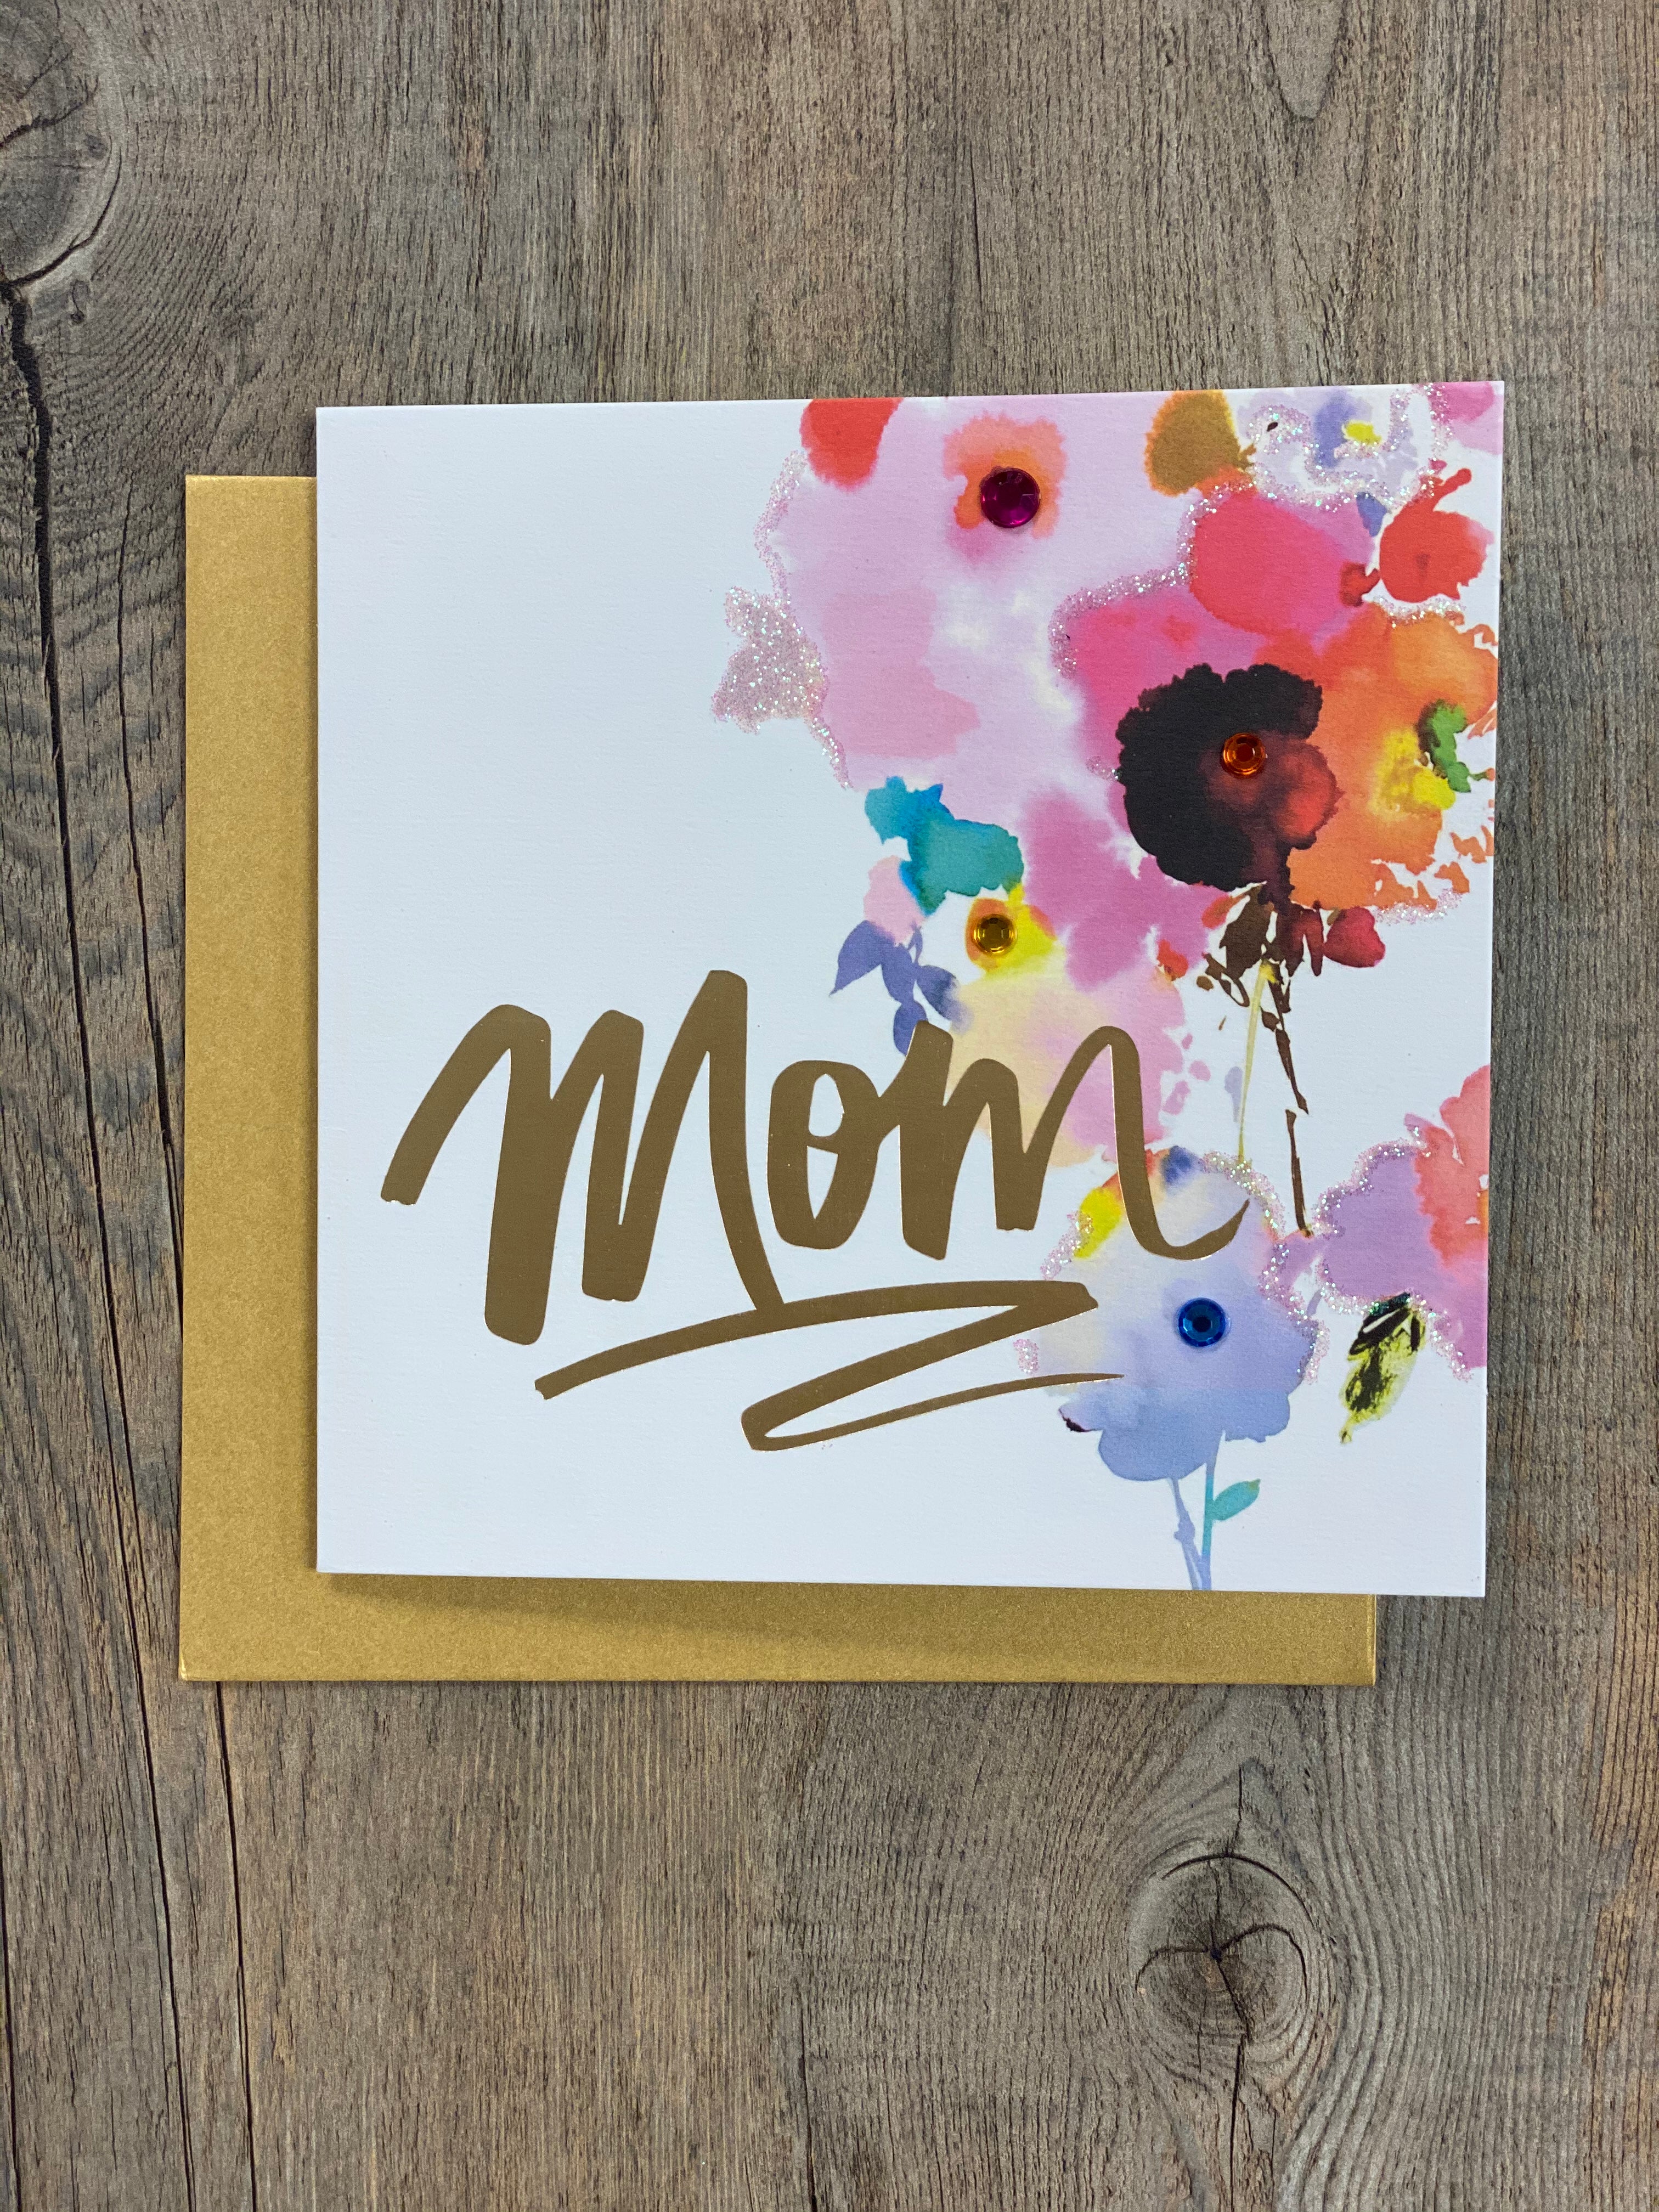 Mother's Day- Bright Floral